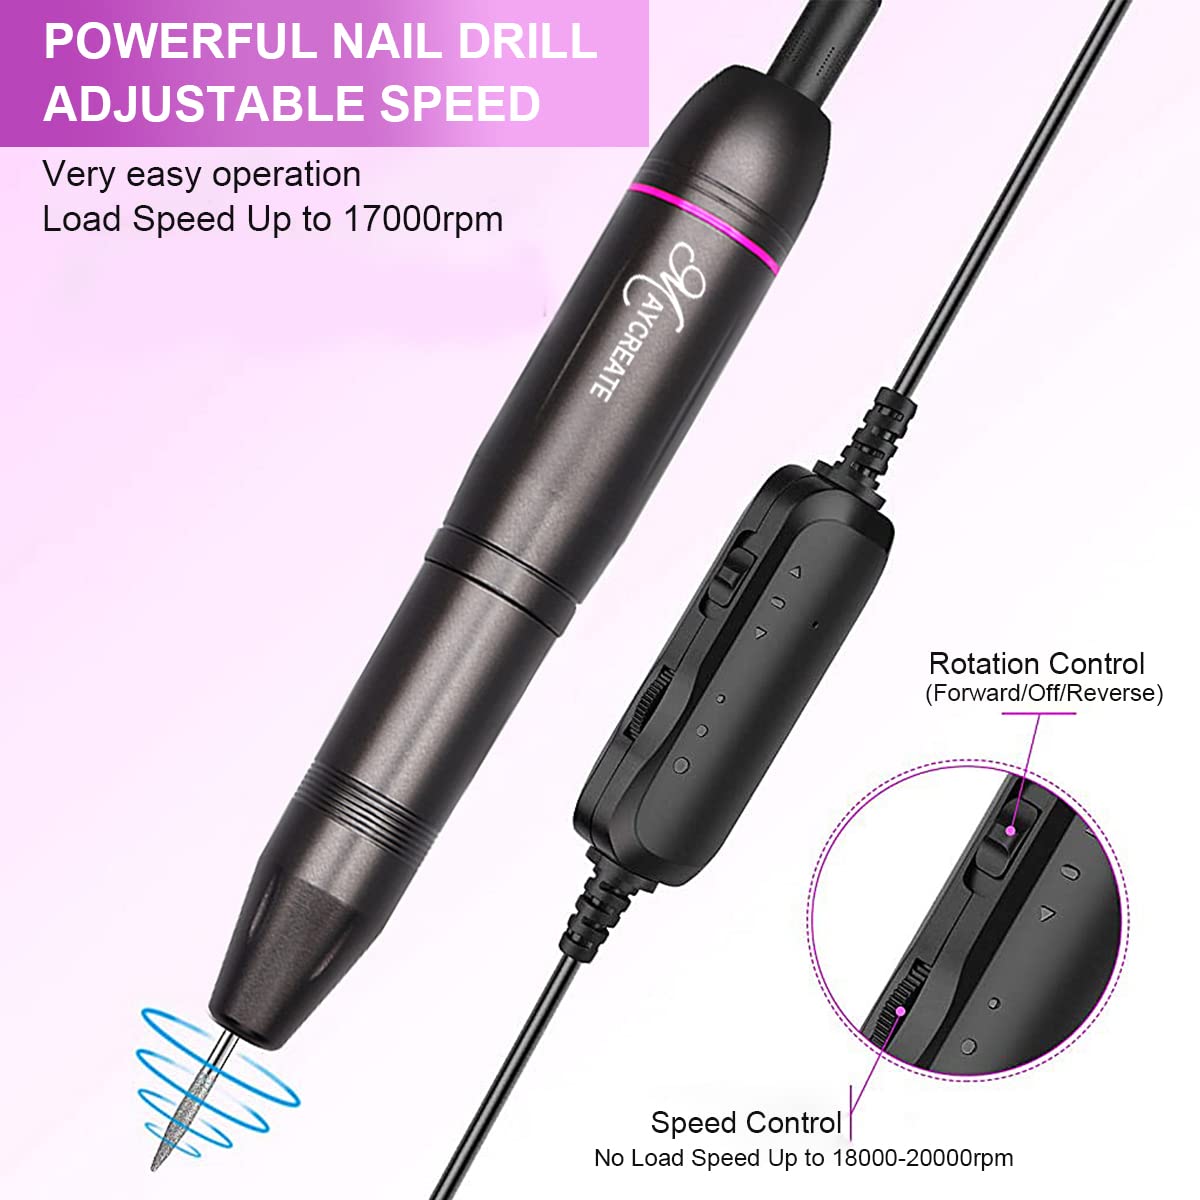 Nail Drill Machine Professional, 20000rpm Adjustable Electric Nail Filer Machine with 25pcs Accessories, Portable Manicure Pedicure Kit for Women, Nail Salon, Acrylic Gels Callus Removal4